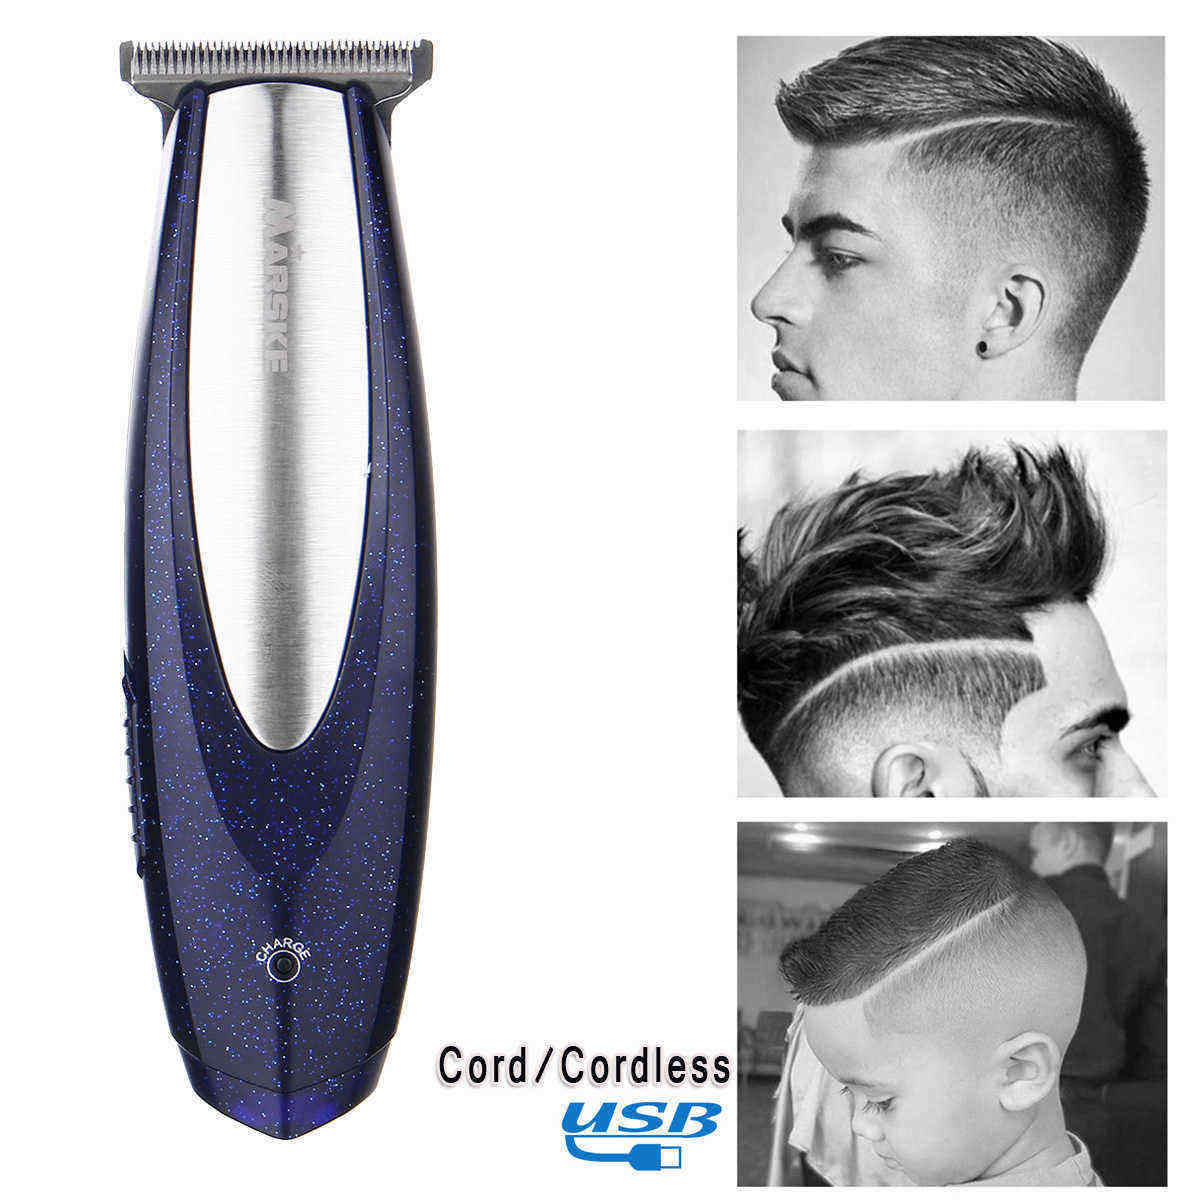 100-240V-Hair-Clipper-Trimmers-for-Men-Hair-Clippers-Shavers-Trimmers-Rechargeable-Mens-Grooming-Kit-1471379